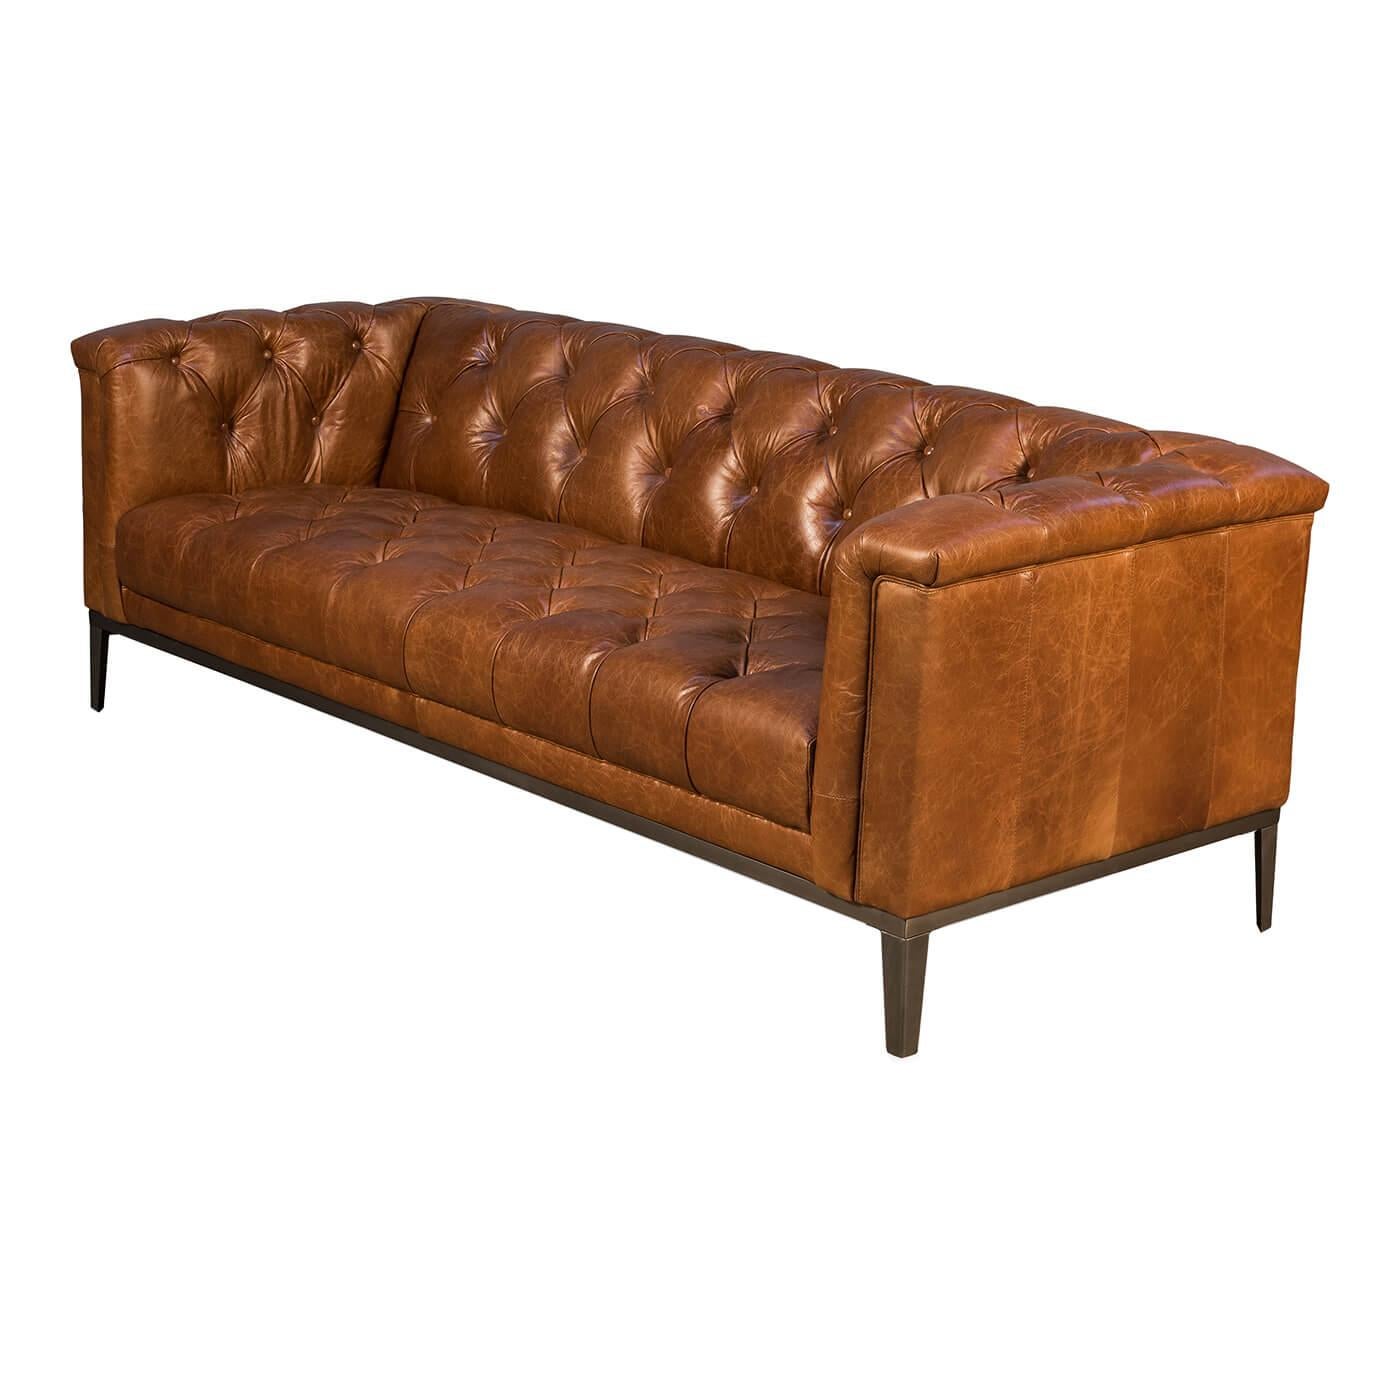 Mid-Century Modern style tufted leather upholstered sofa with a vintage brown top grain leather, with a tufted backrest and squared arms on metal base with square tapered legs.

Dimensions: 88